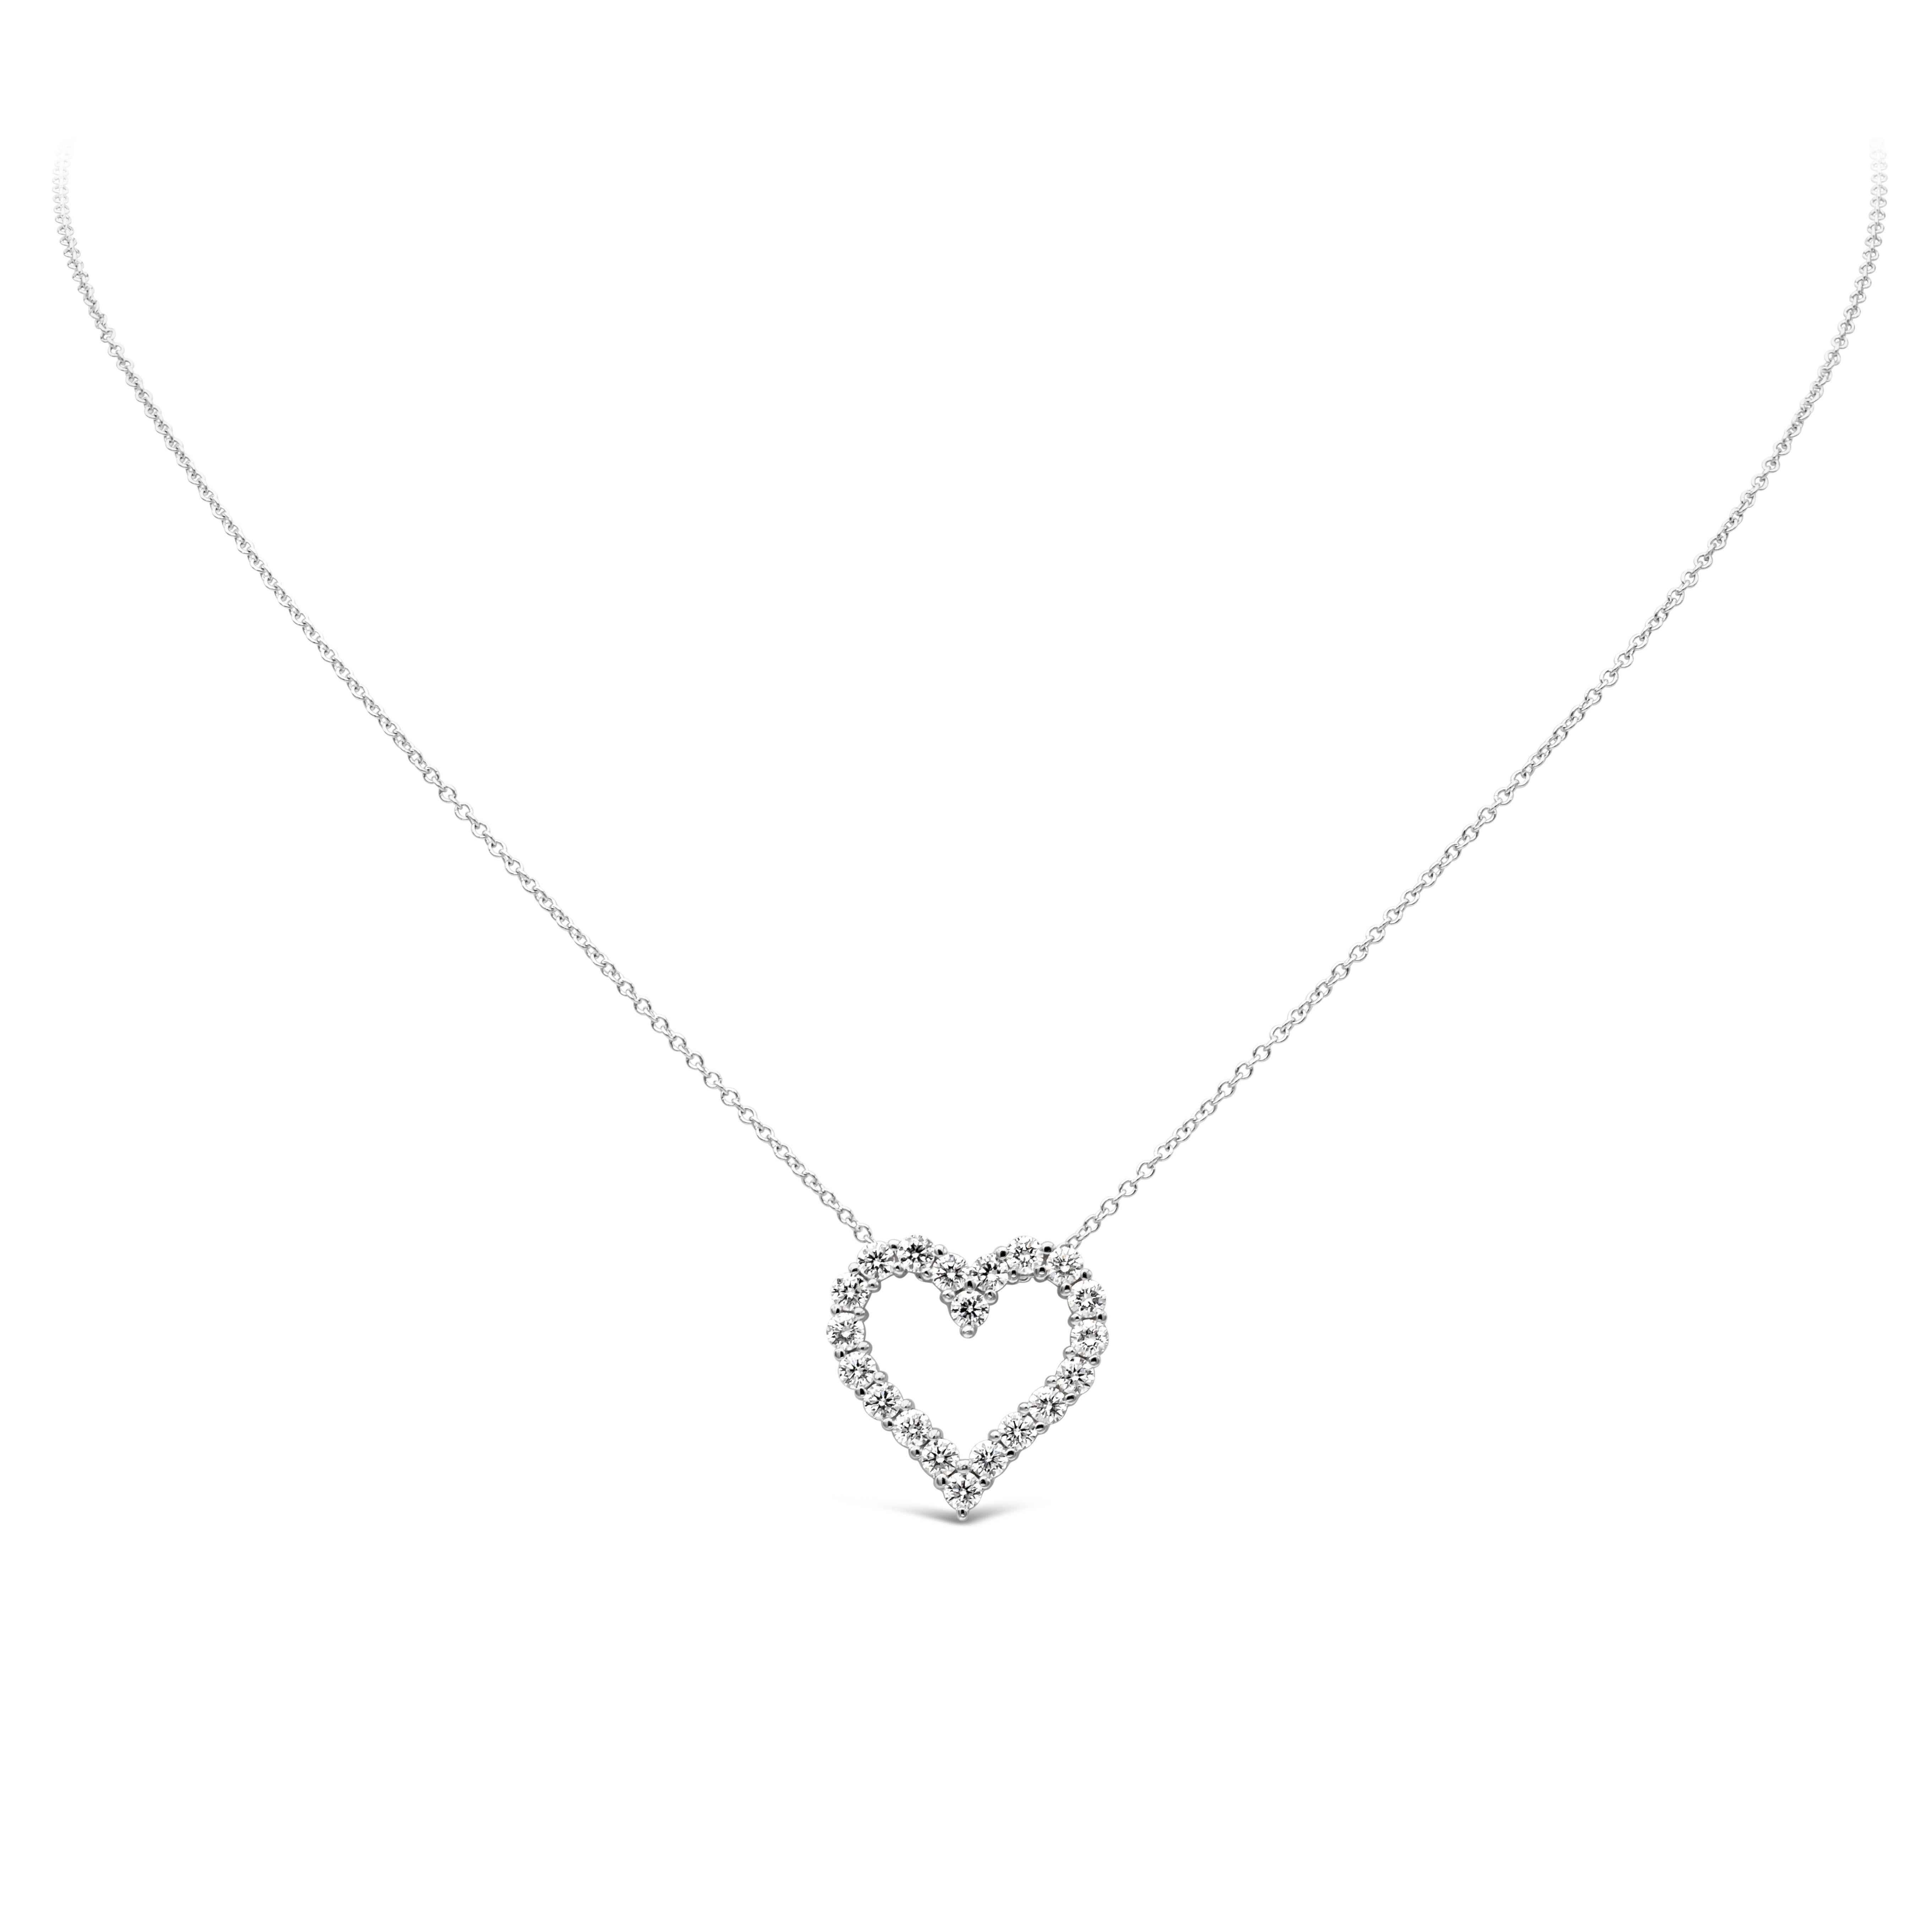 A simple and unique pendant necklace showcasing a row of round brilliant diamonds weighing 0.82 carats total, F color VS-SI1 clarity. Set in an open-work heart shape mounting made in 18K White Gold and shared prong setting. Suspended on an 18 inch